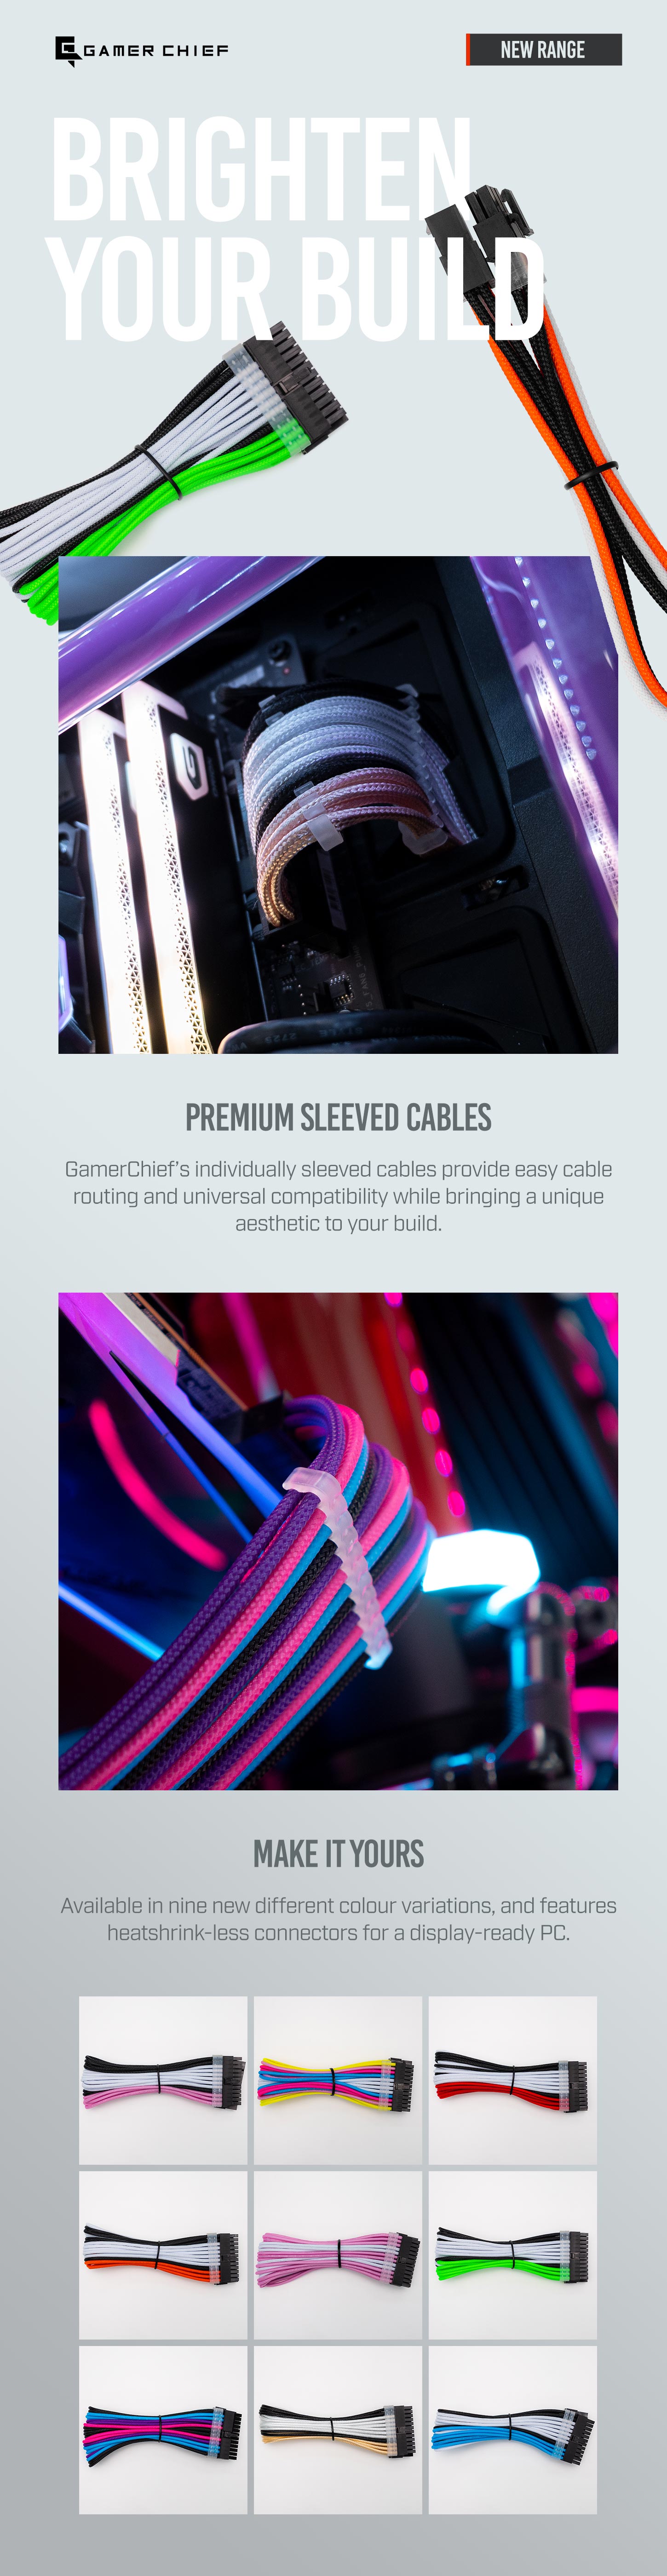 A large marketing image providing additional information about the product GamerChief Elite Series 6-Pin PCIe 30cm Sleeved Extension Cable (Pink/White/Black) - Additional alt info not provided